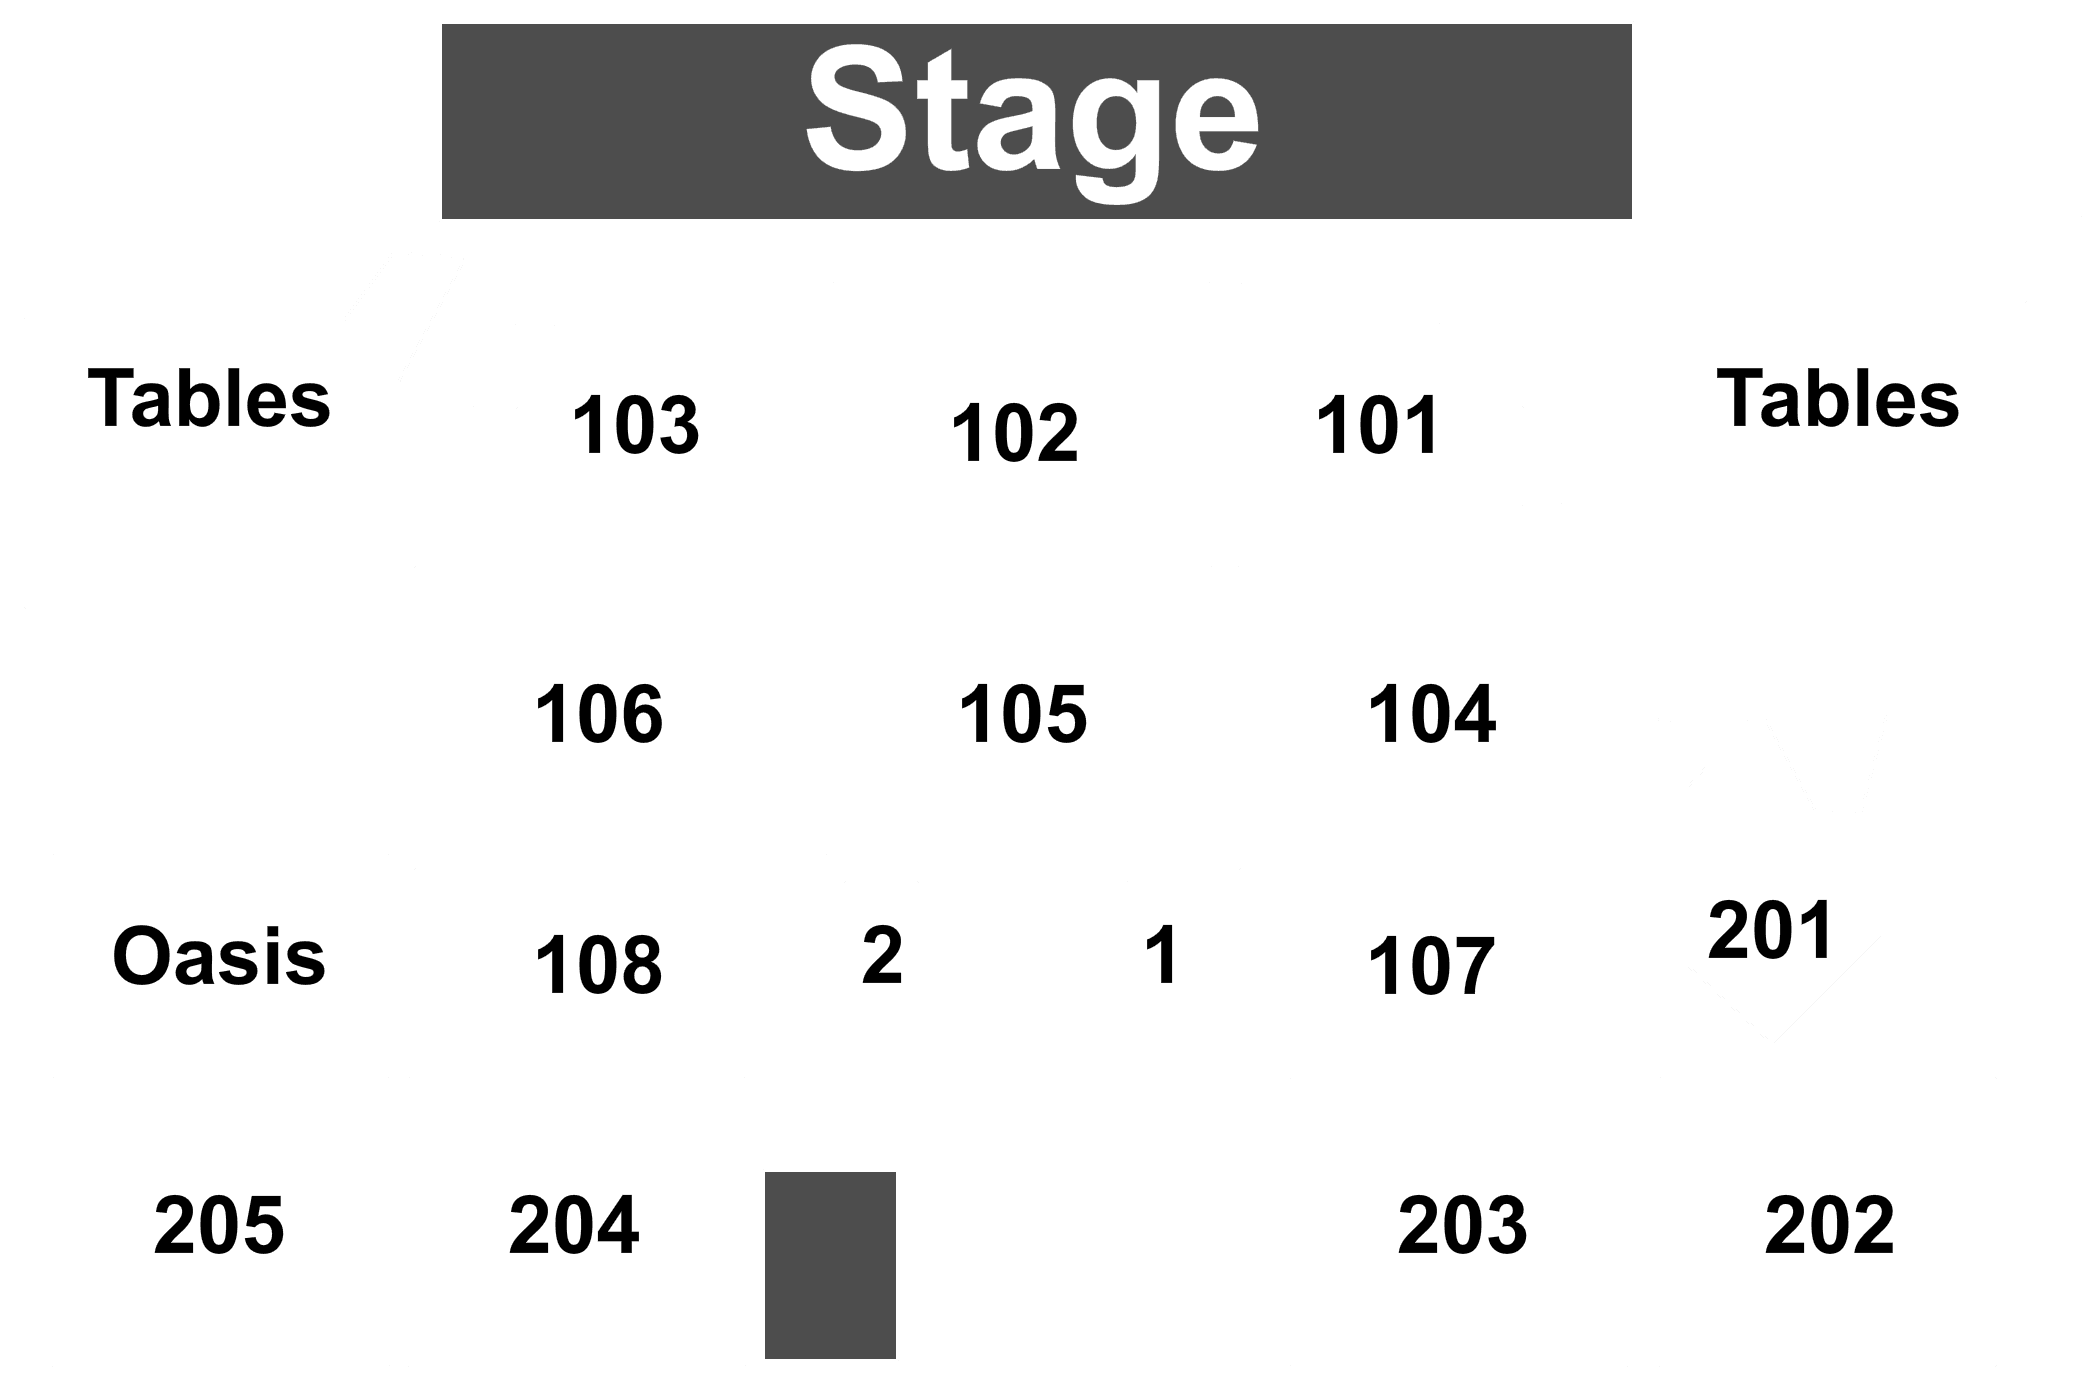 Sands Steel Stage Bethlehem Pa Seating Chart